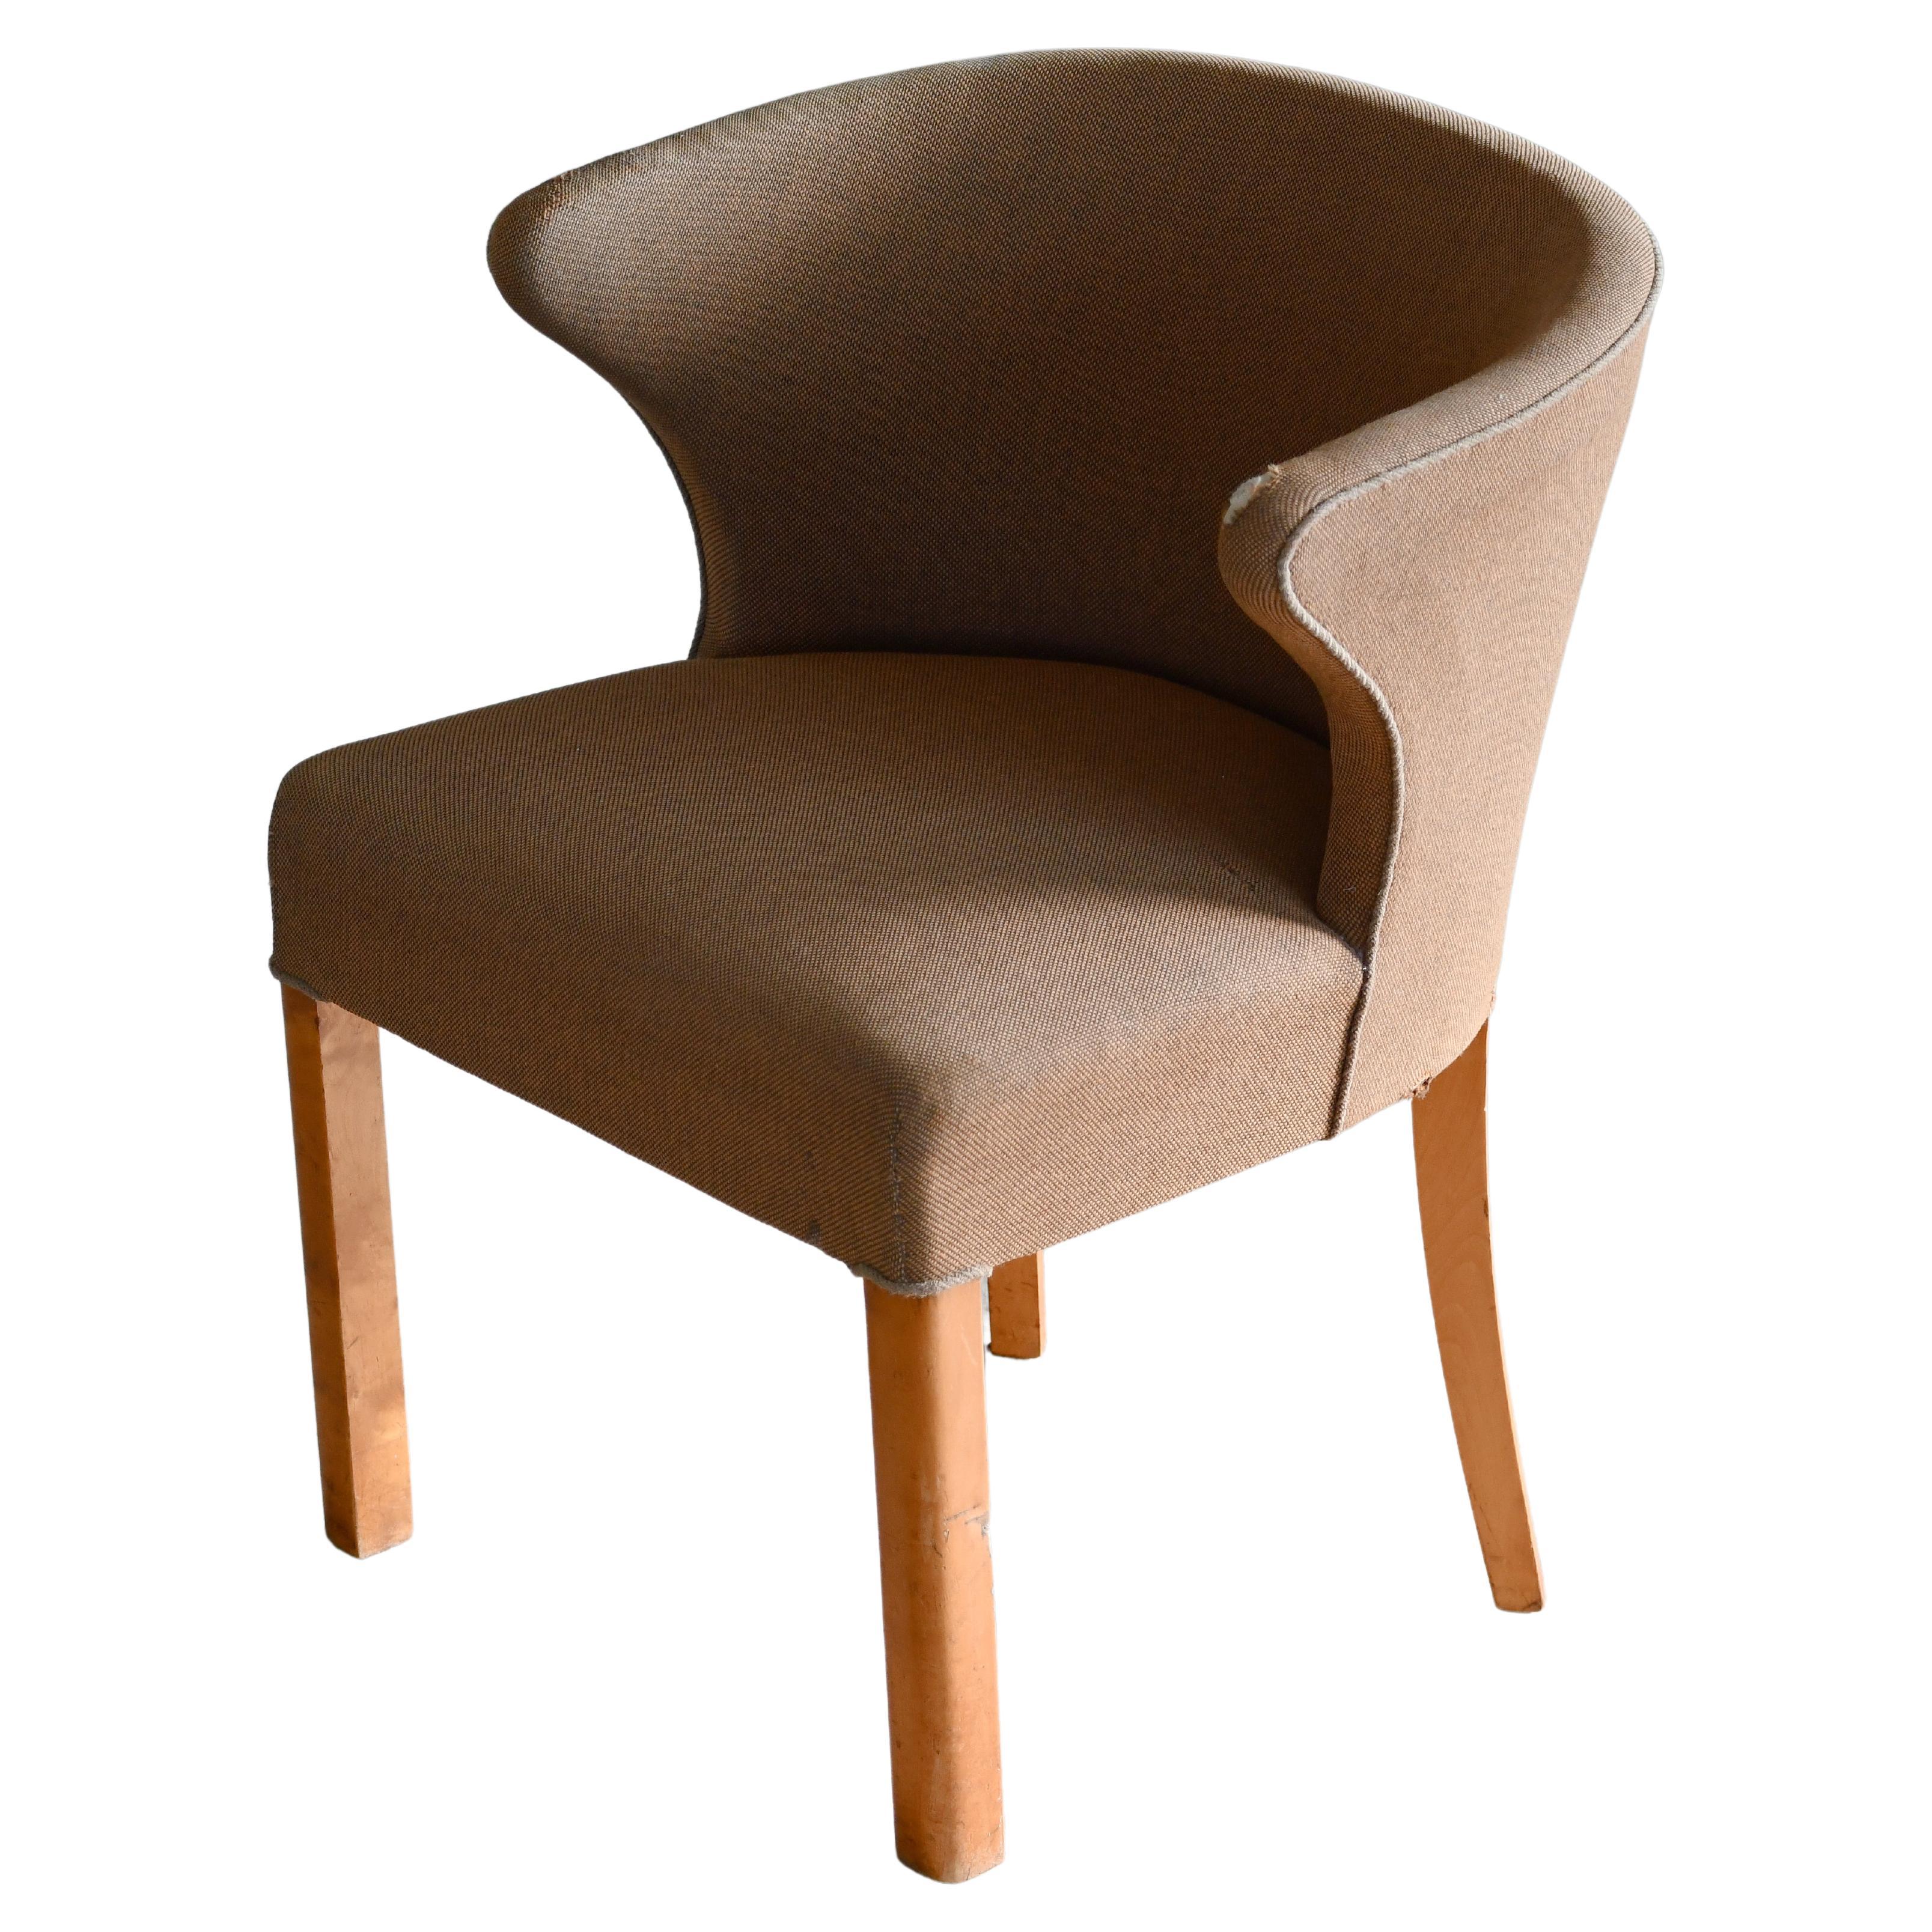 1940's Danish Accent or Armchair in style of Fritz Hansen Natural Maple Legs For Sale